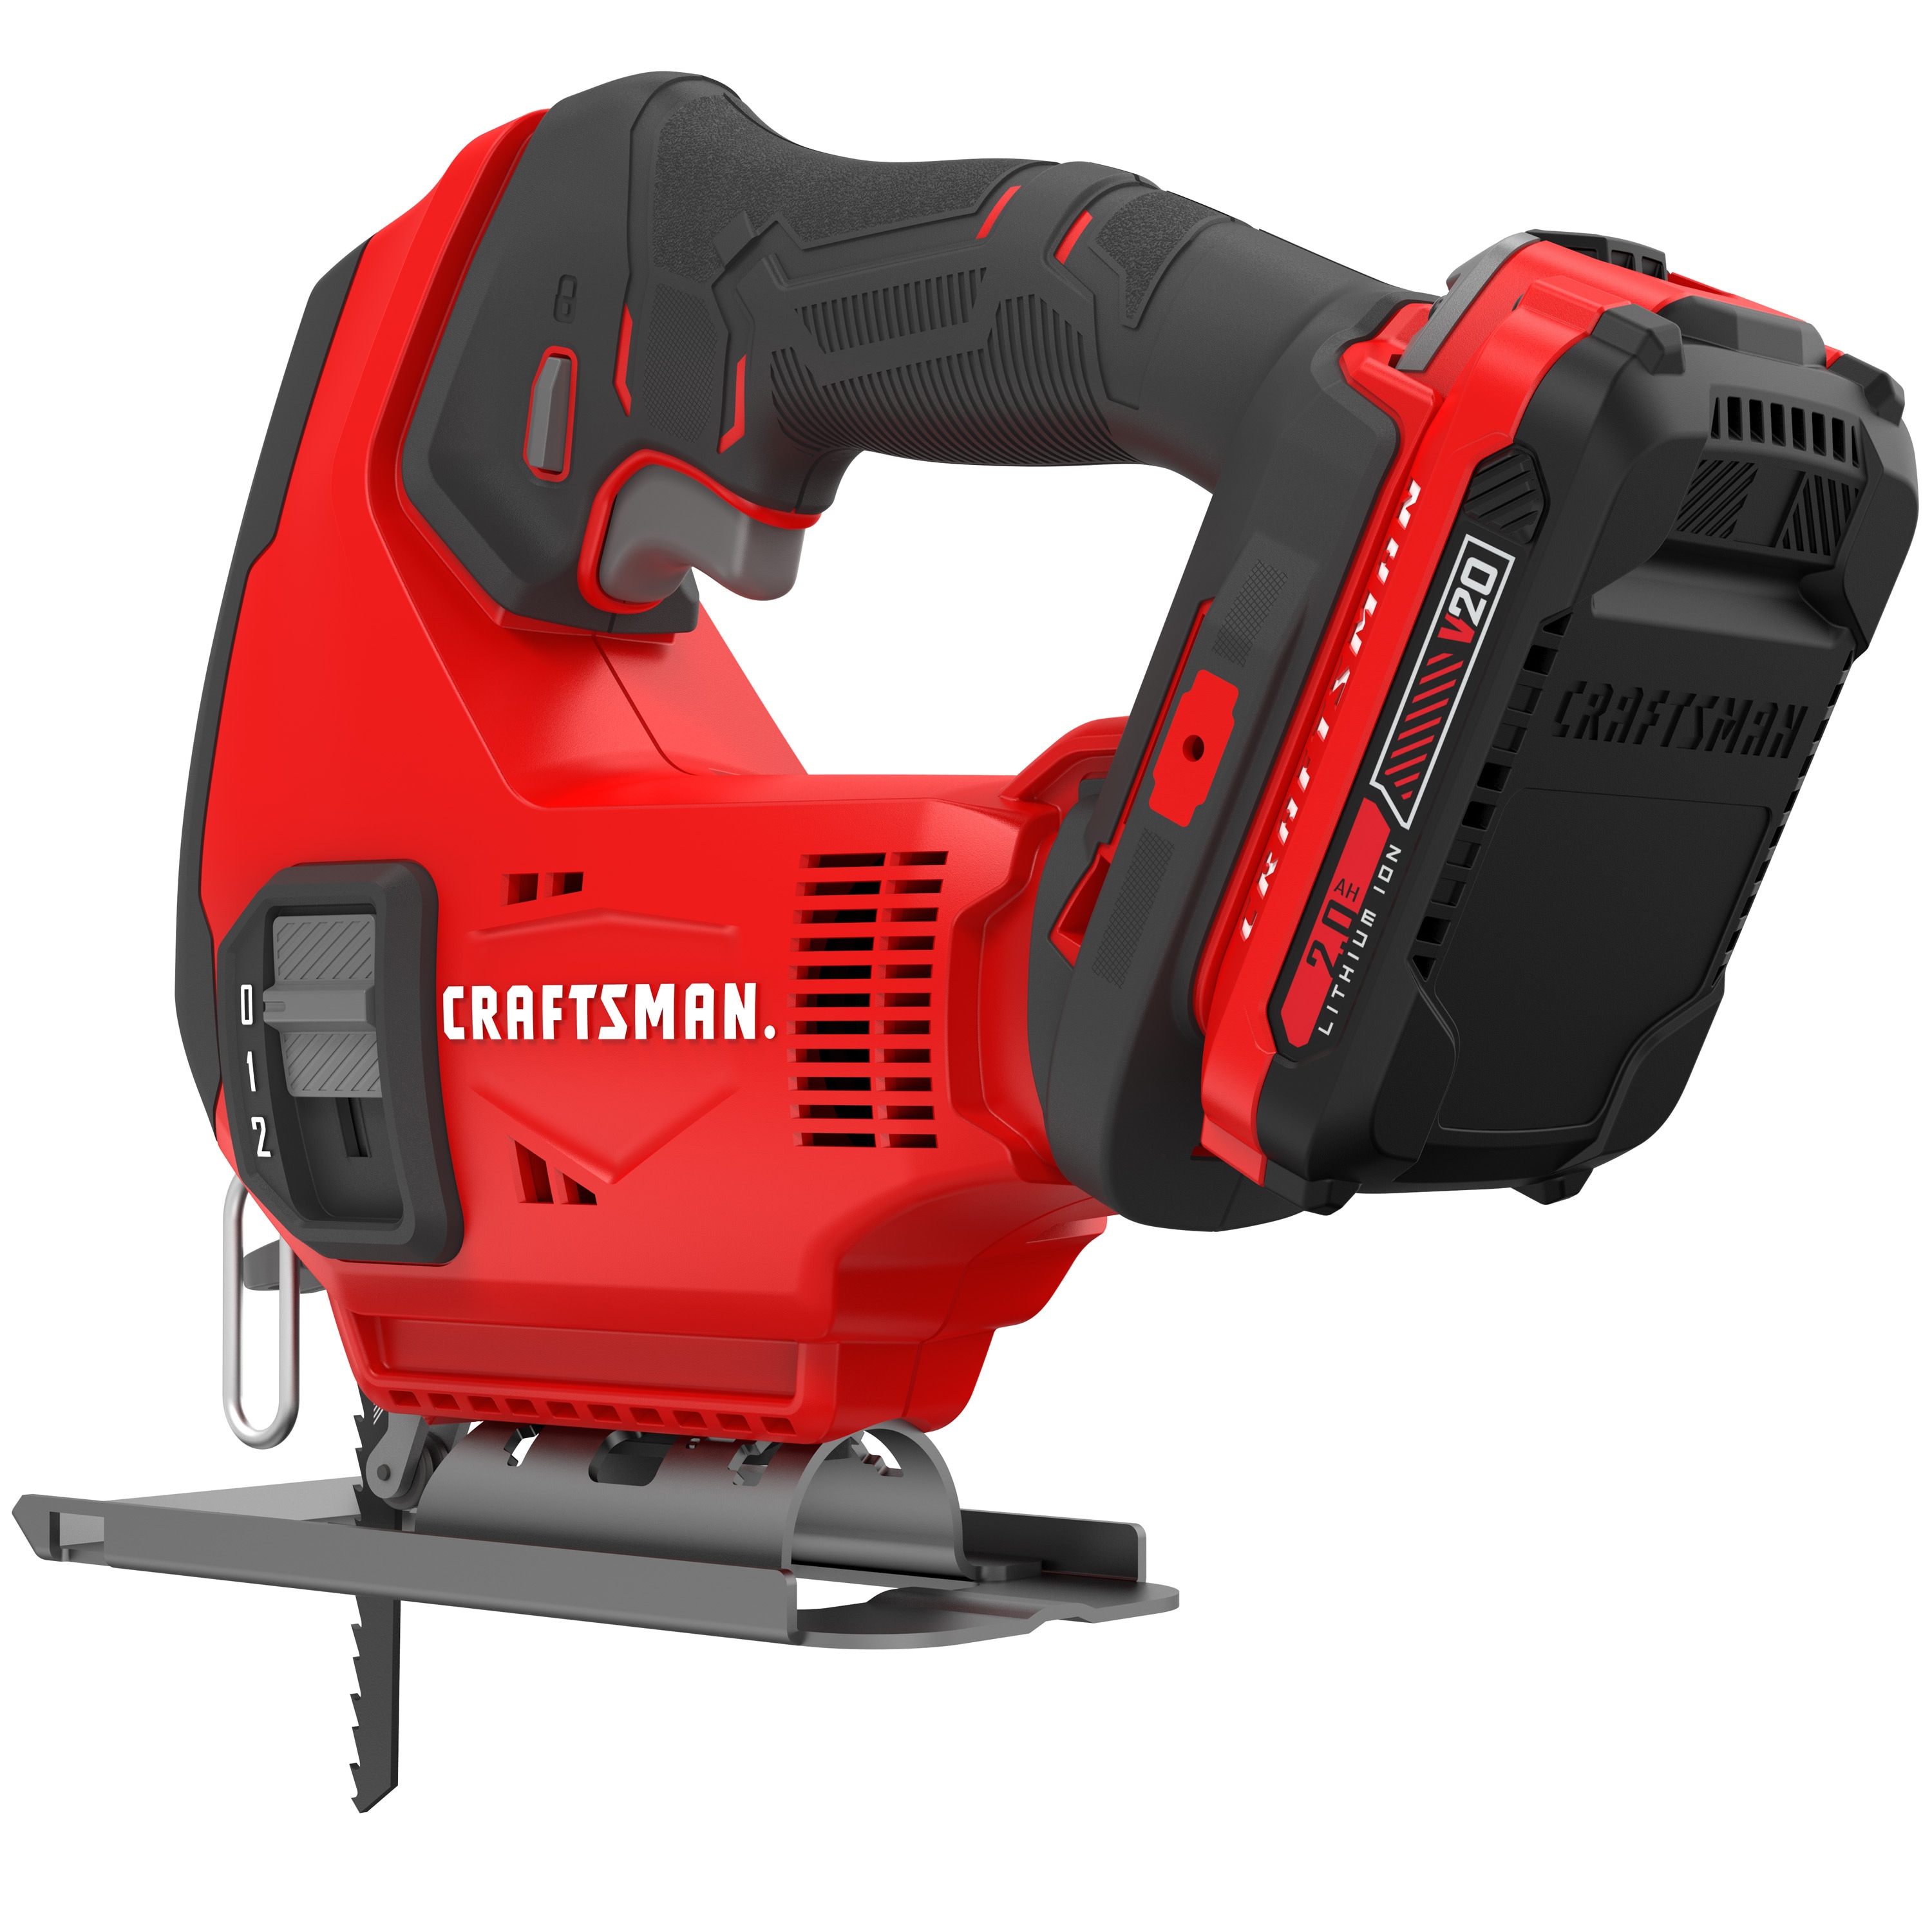 CRAFTSMAN V20 20-volt Max Variable Speed Keyless Cordless Jigsaw (Battery Included)